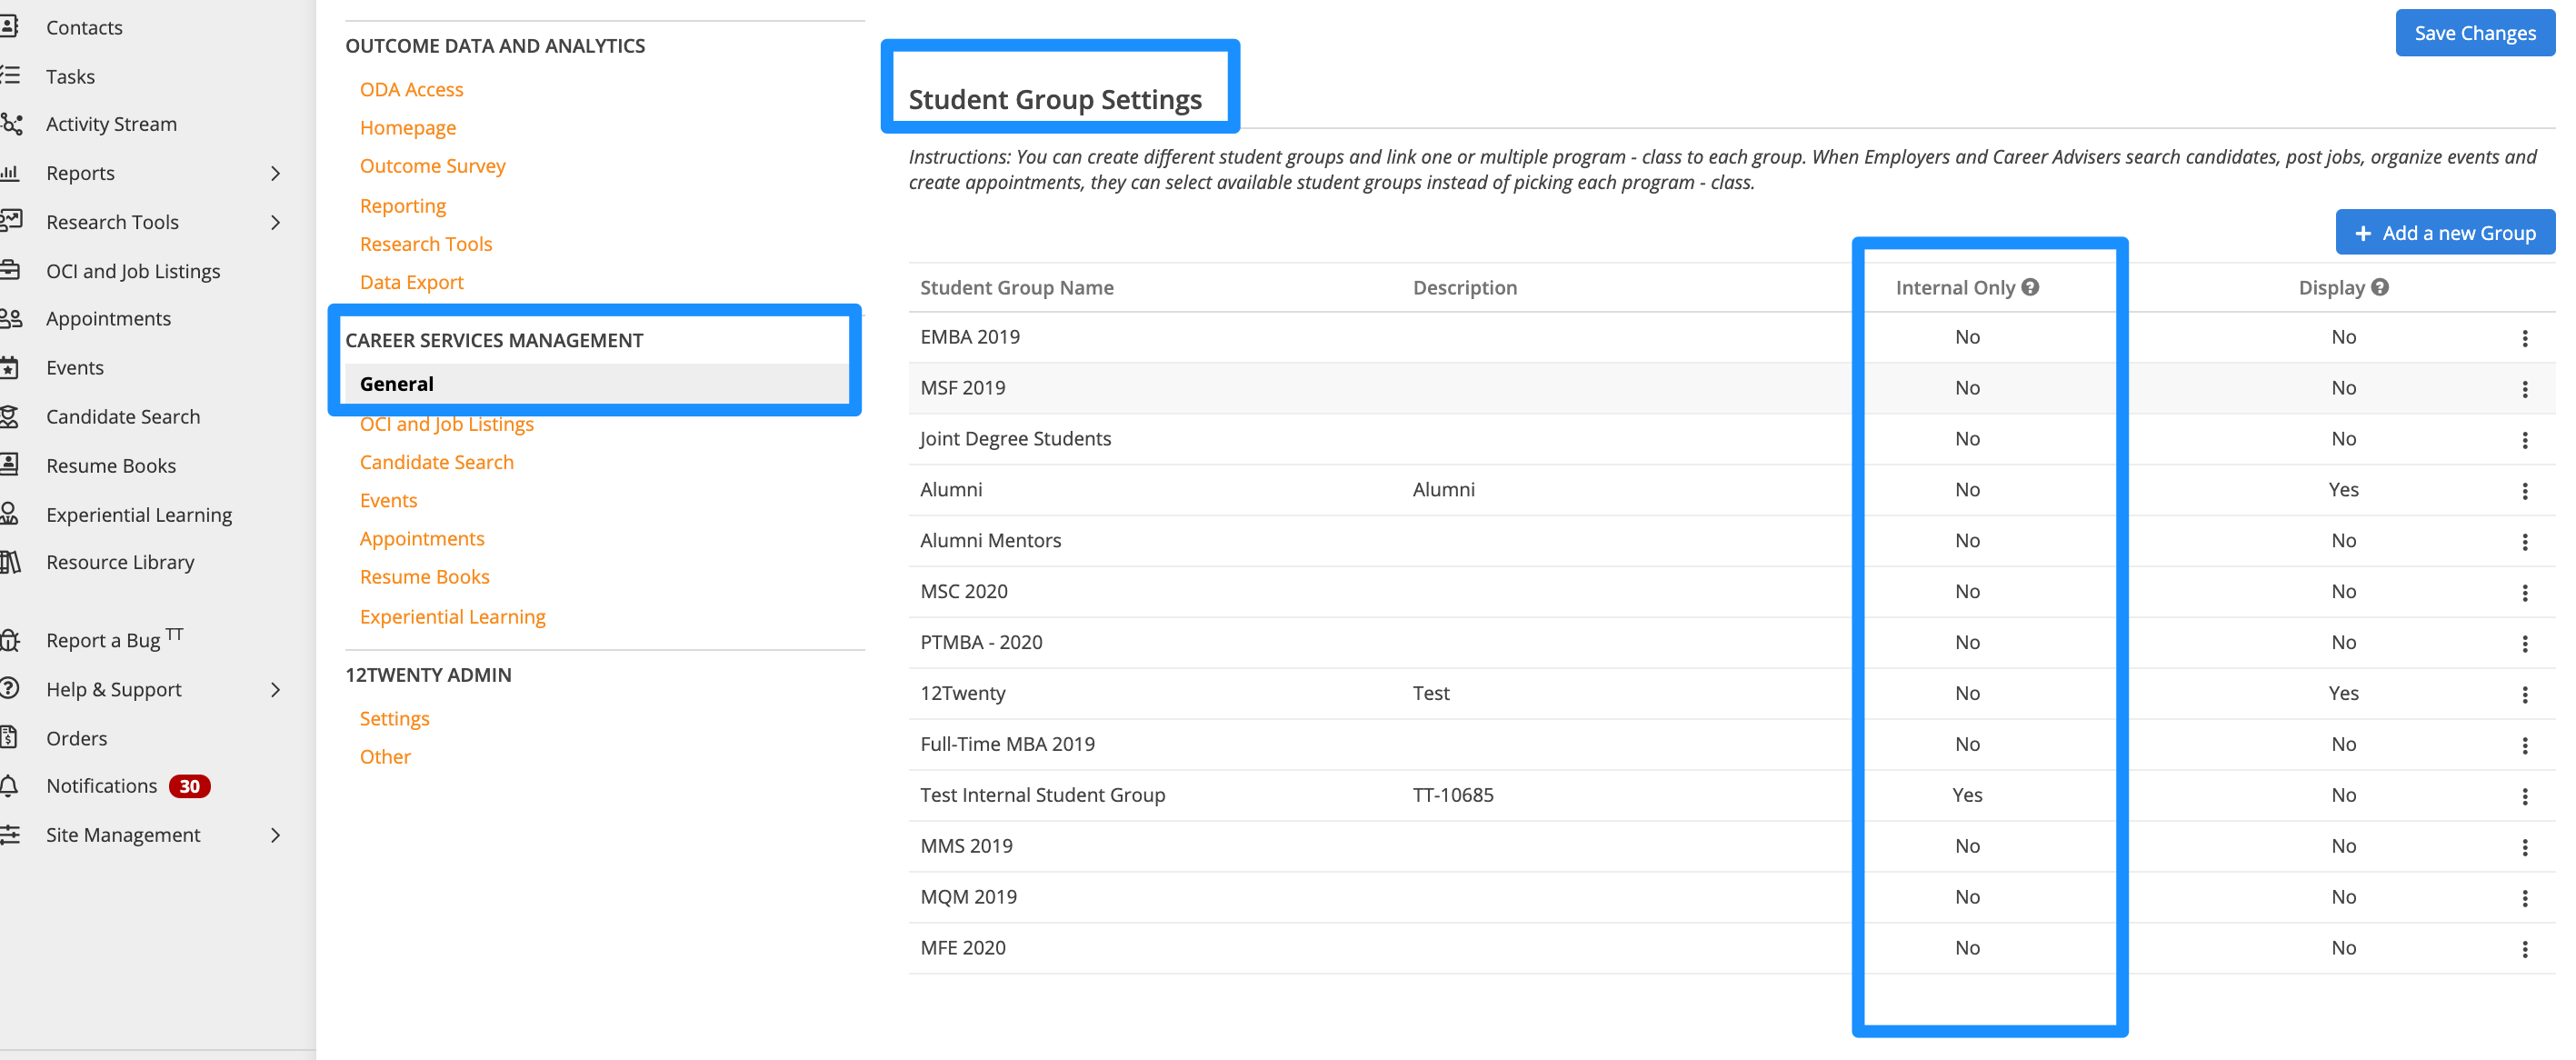 the image shows the Site Settings for Career Services Management, where Student Group Settings can be adjusted from the General tab